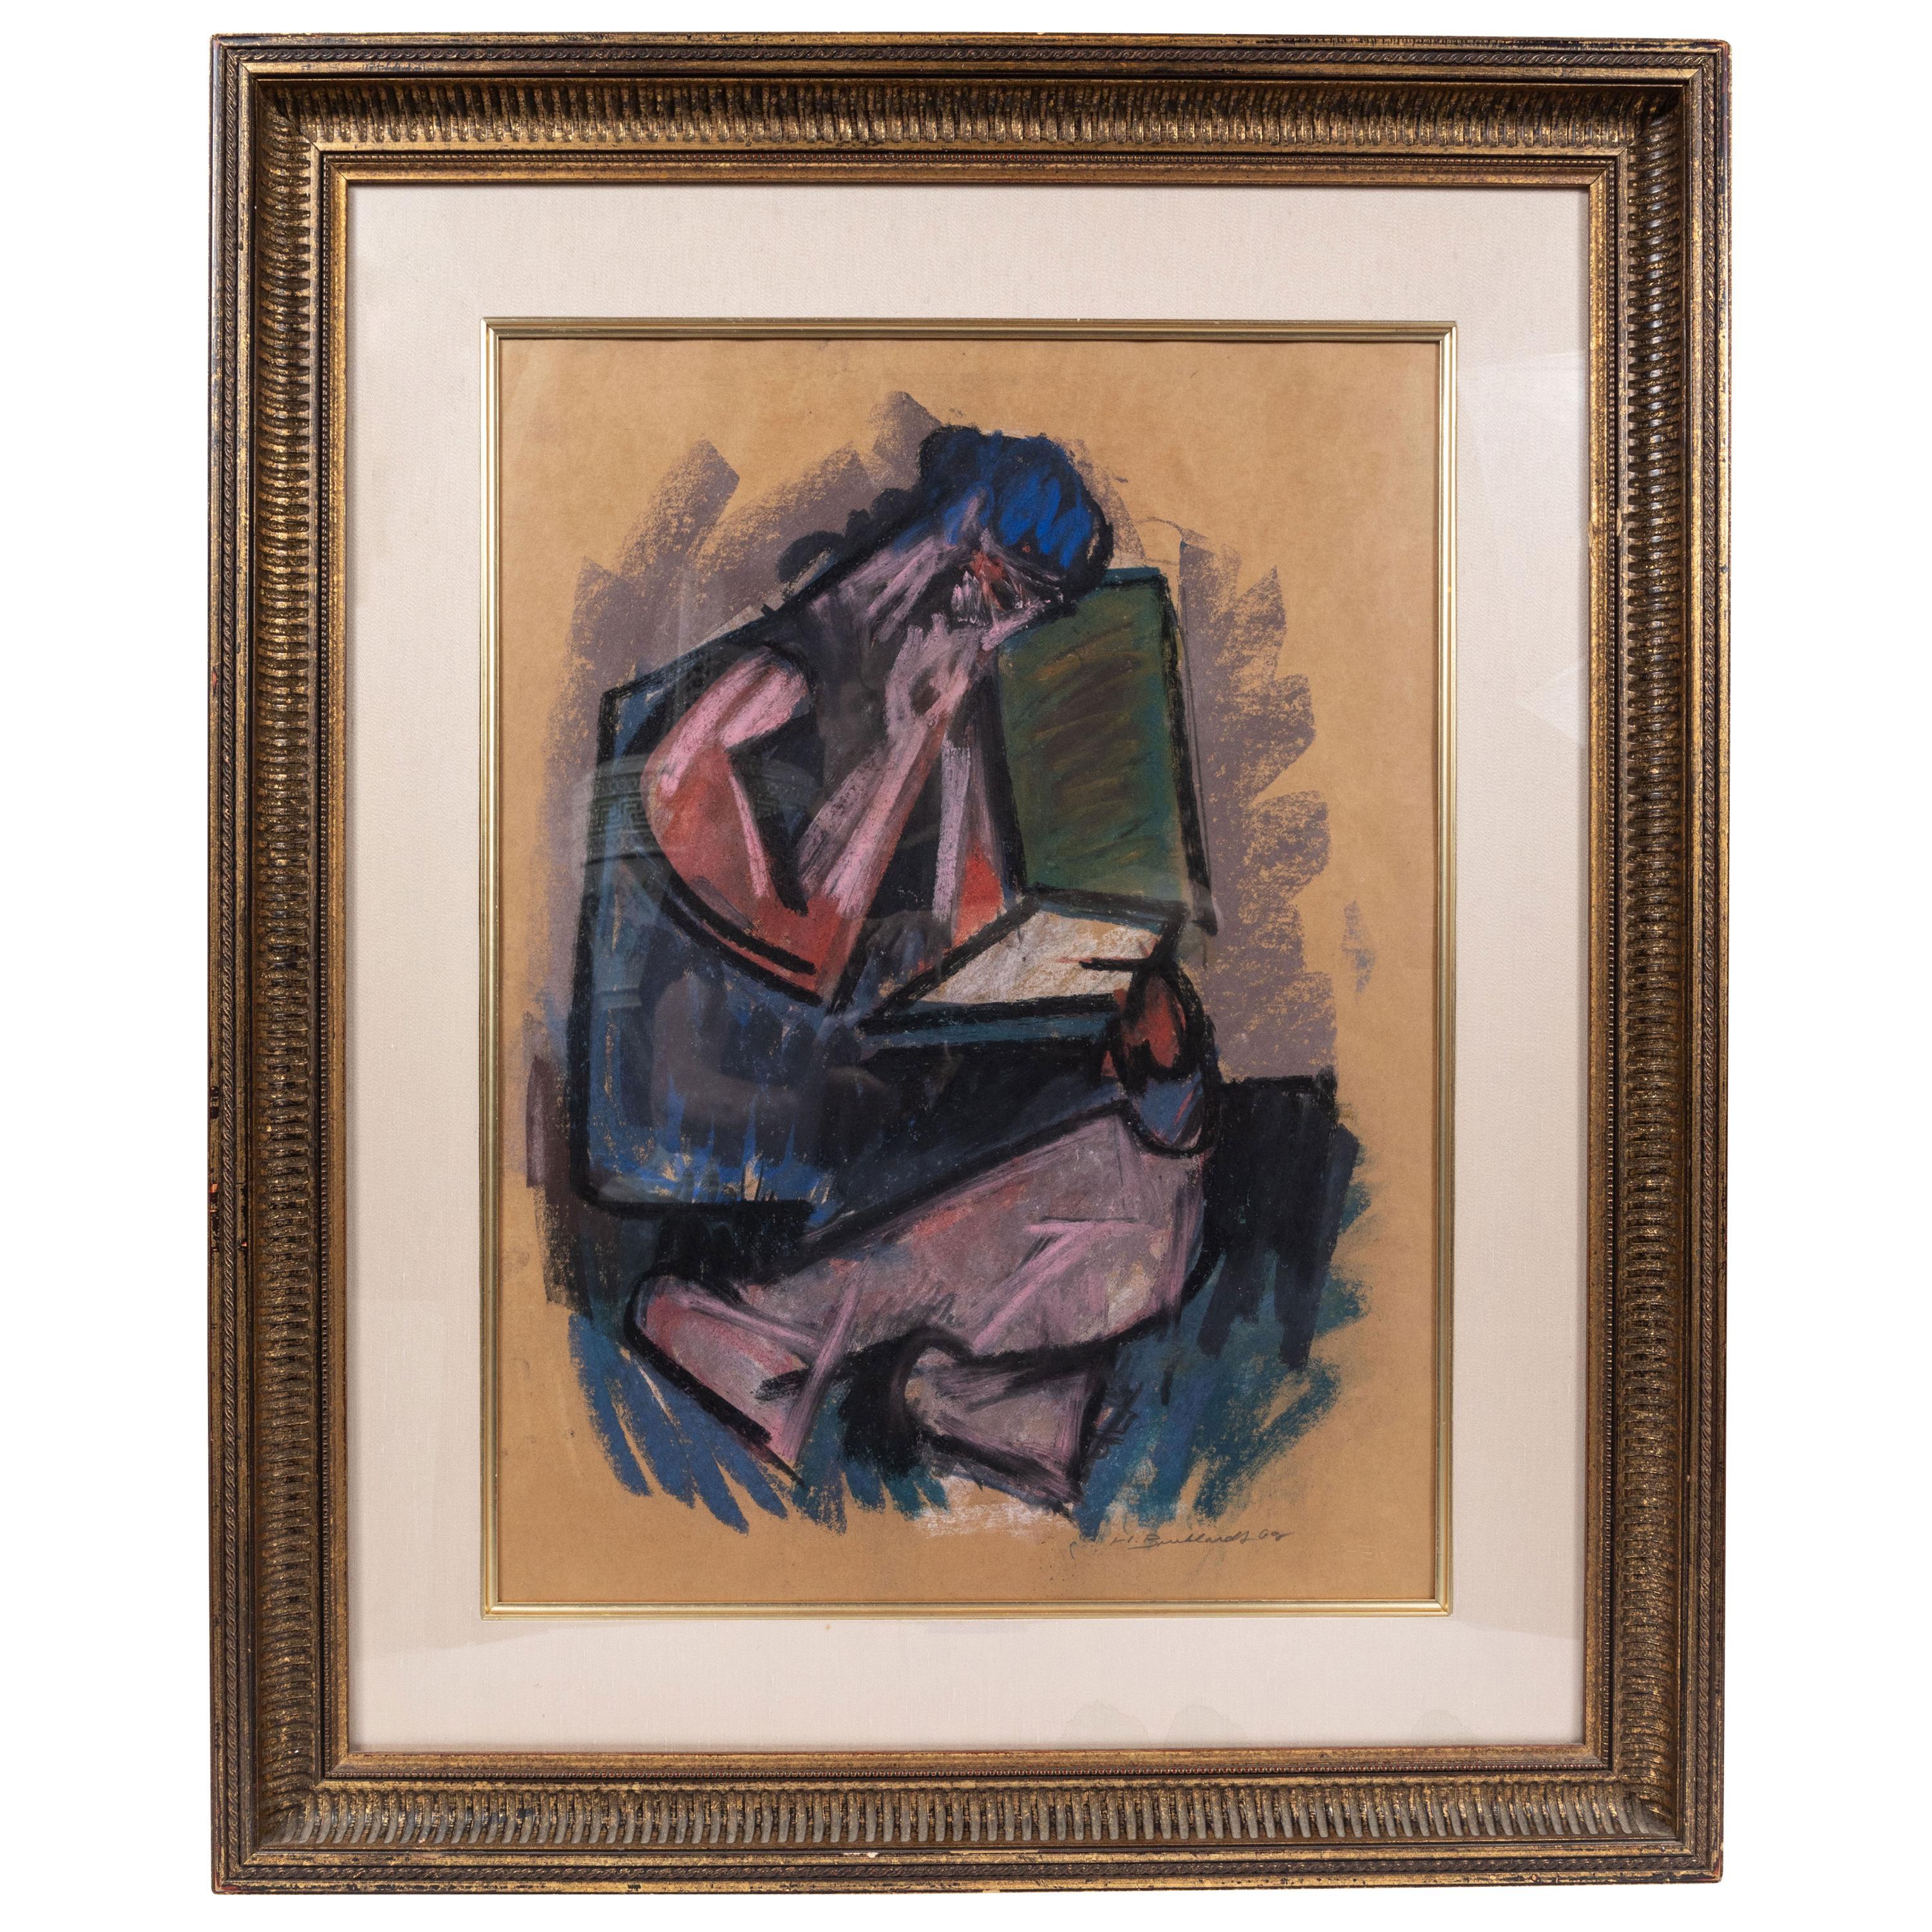 Signed and dated, abstract figurative, acrylic and pastel artwork on paper by important American artist, Hans Burkhardt (1904-1994).

From Wikipedia: "When he moved to Los Angeles in 1937, Burkhardt represented the most significant bridge between